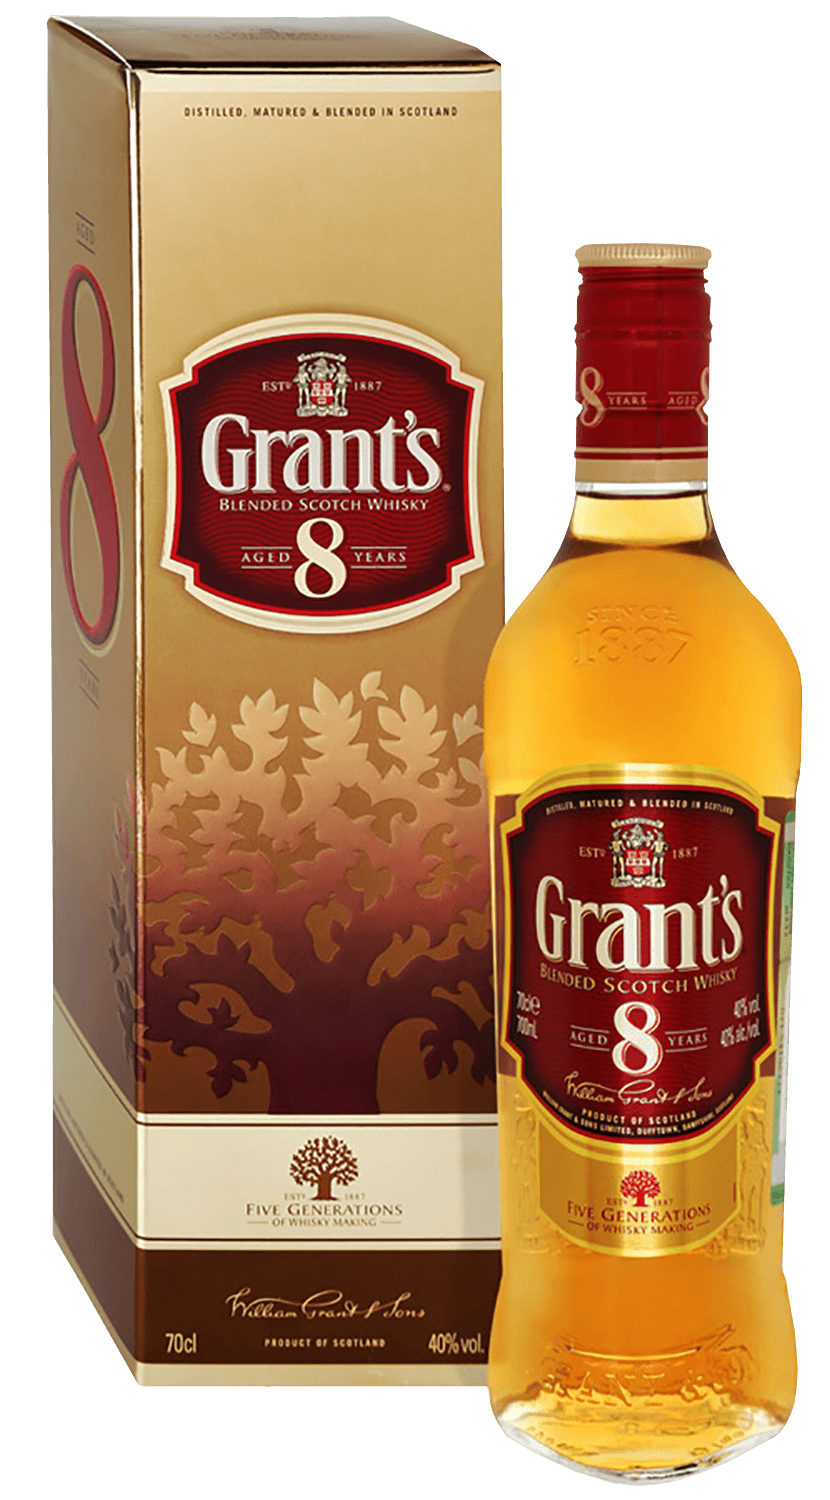 Grant's 8 y.o. Blended Scotch Whisky (gift box with 2 glasses) jamie stuart blended scotch whisky 3 y o gift box with 2 glasses